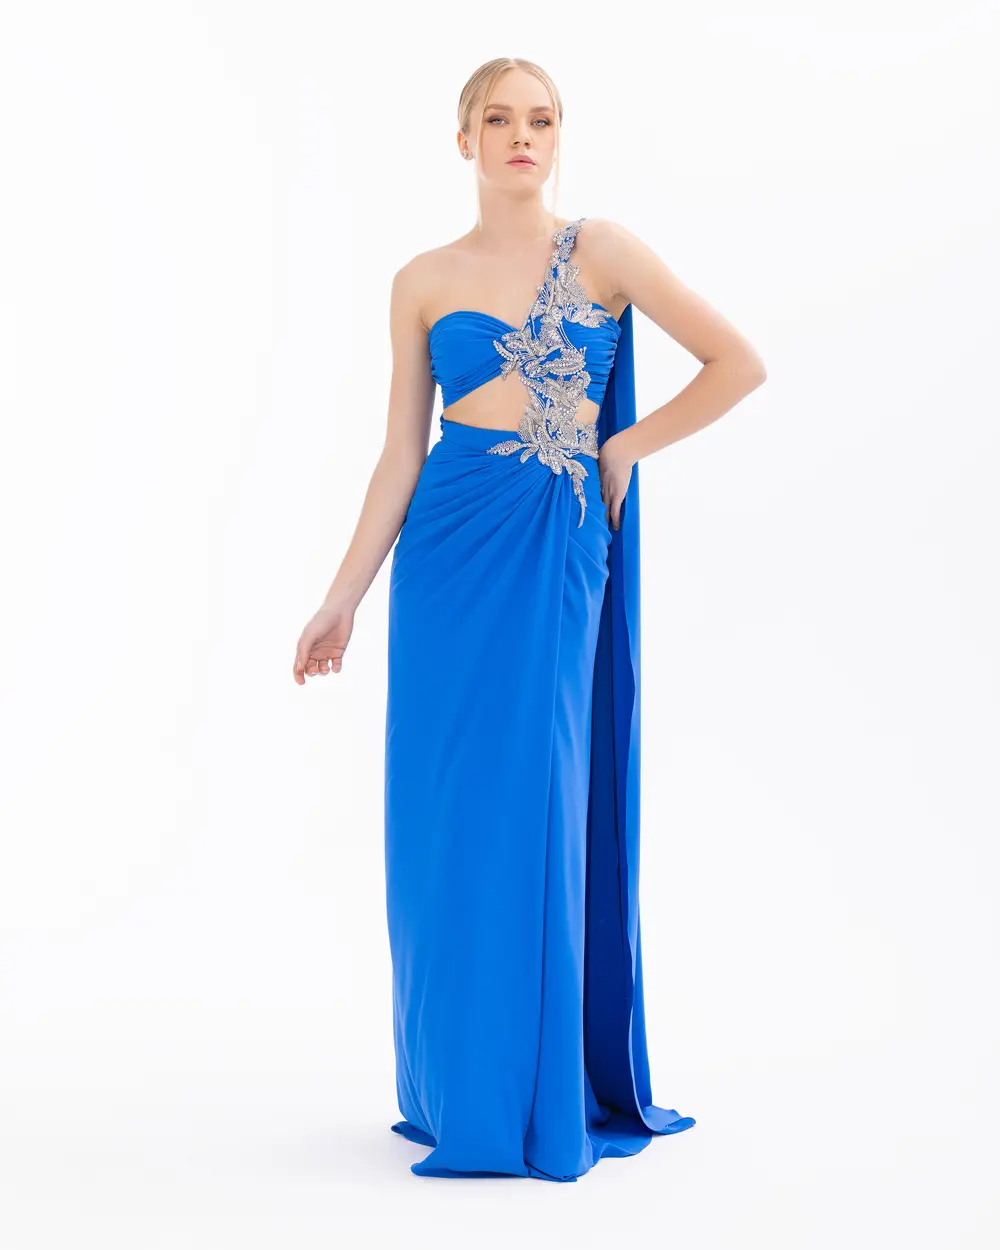 Strapless Satin Evening Dress with Indian Accessories